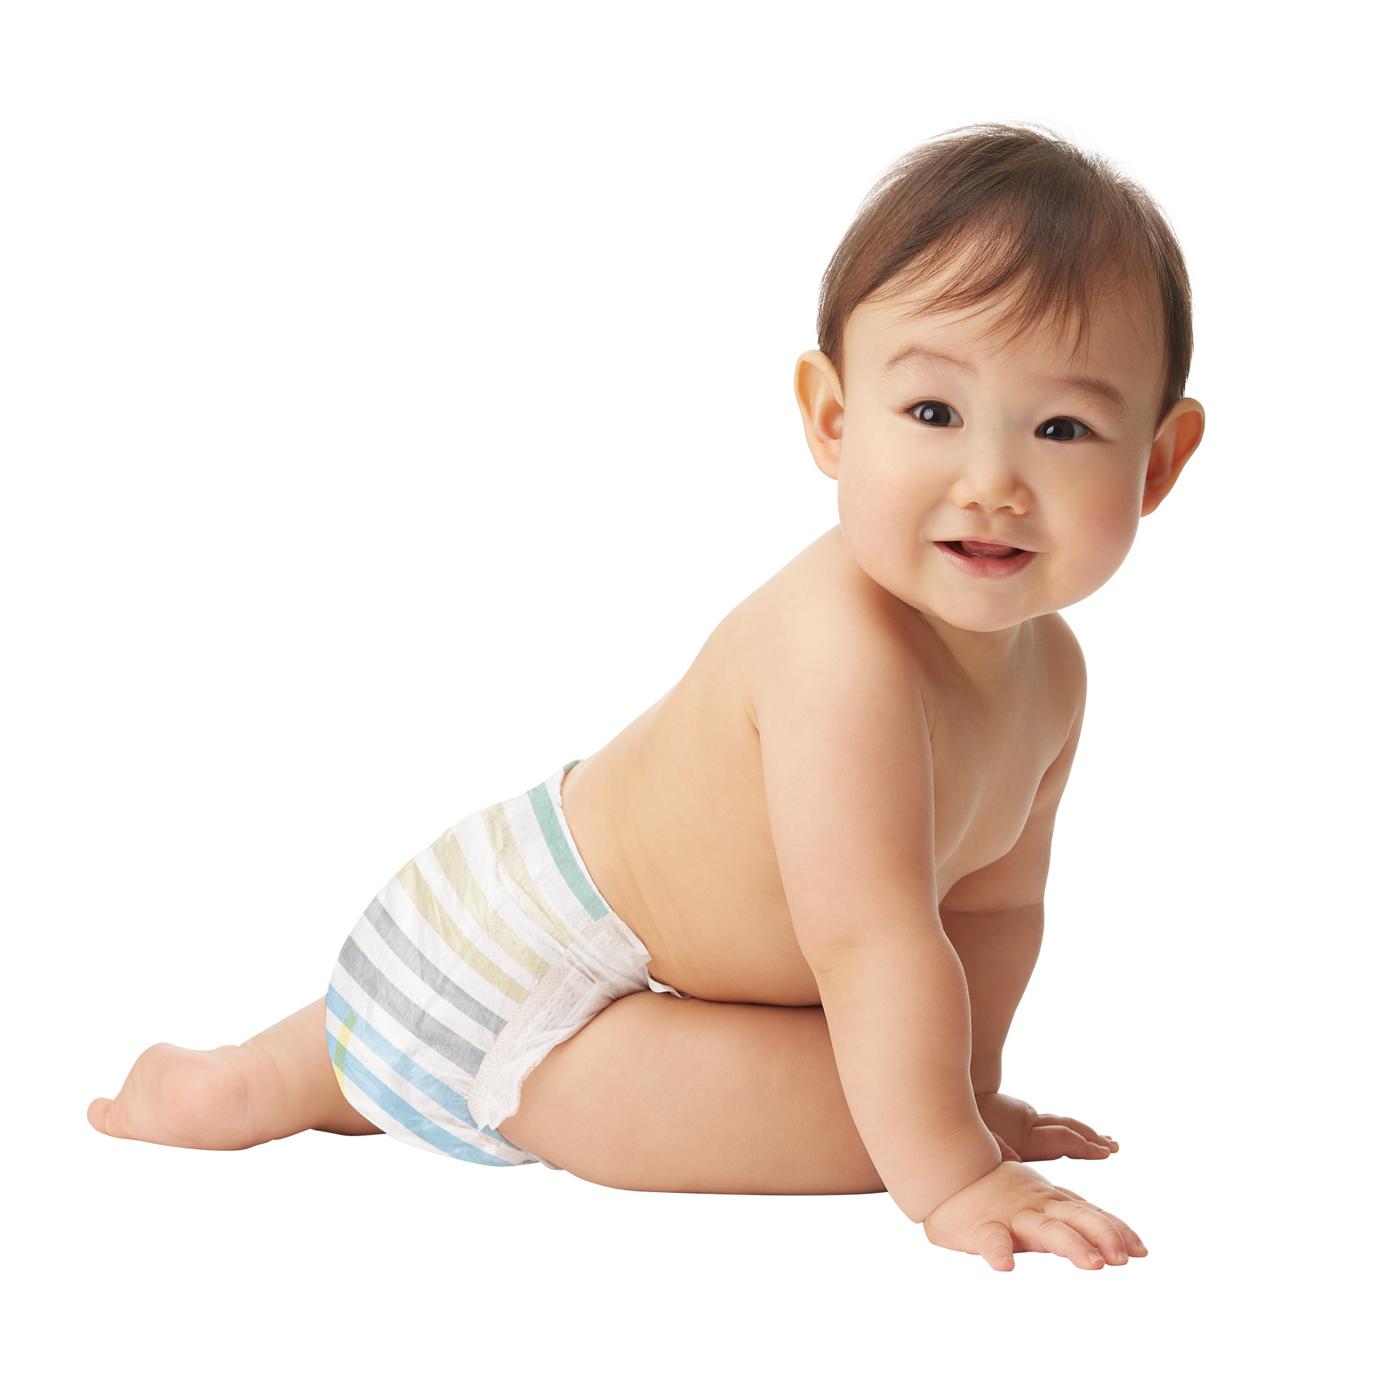 The Honest Company Clean Conscious Diapers Club Box - Size 3, 2 Print Pack; image 4 of 9